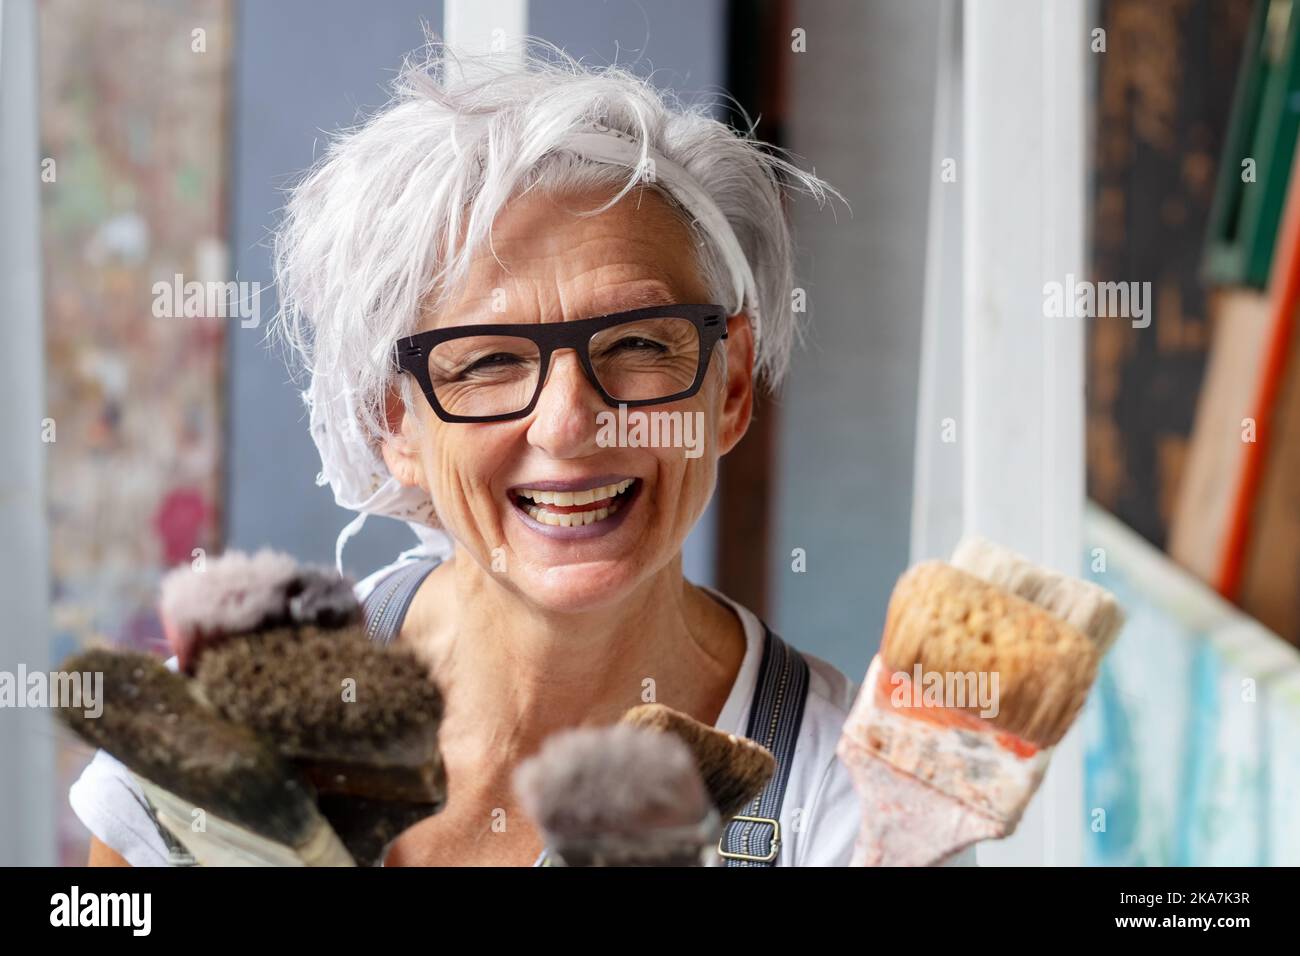 smiling happy older woman portrait, proud artist, in her fifties with grey hair and black glasses and many paintbrushes, copy space Stock Photo